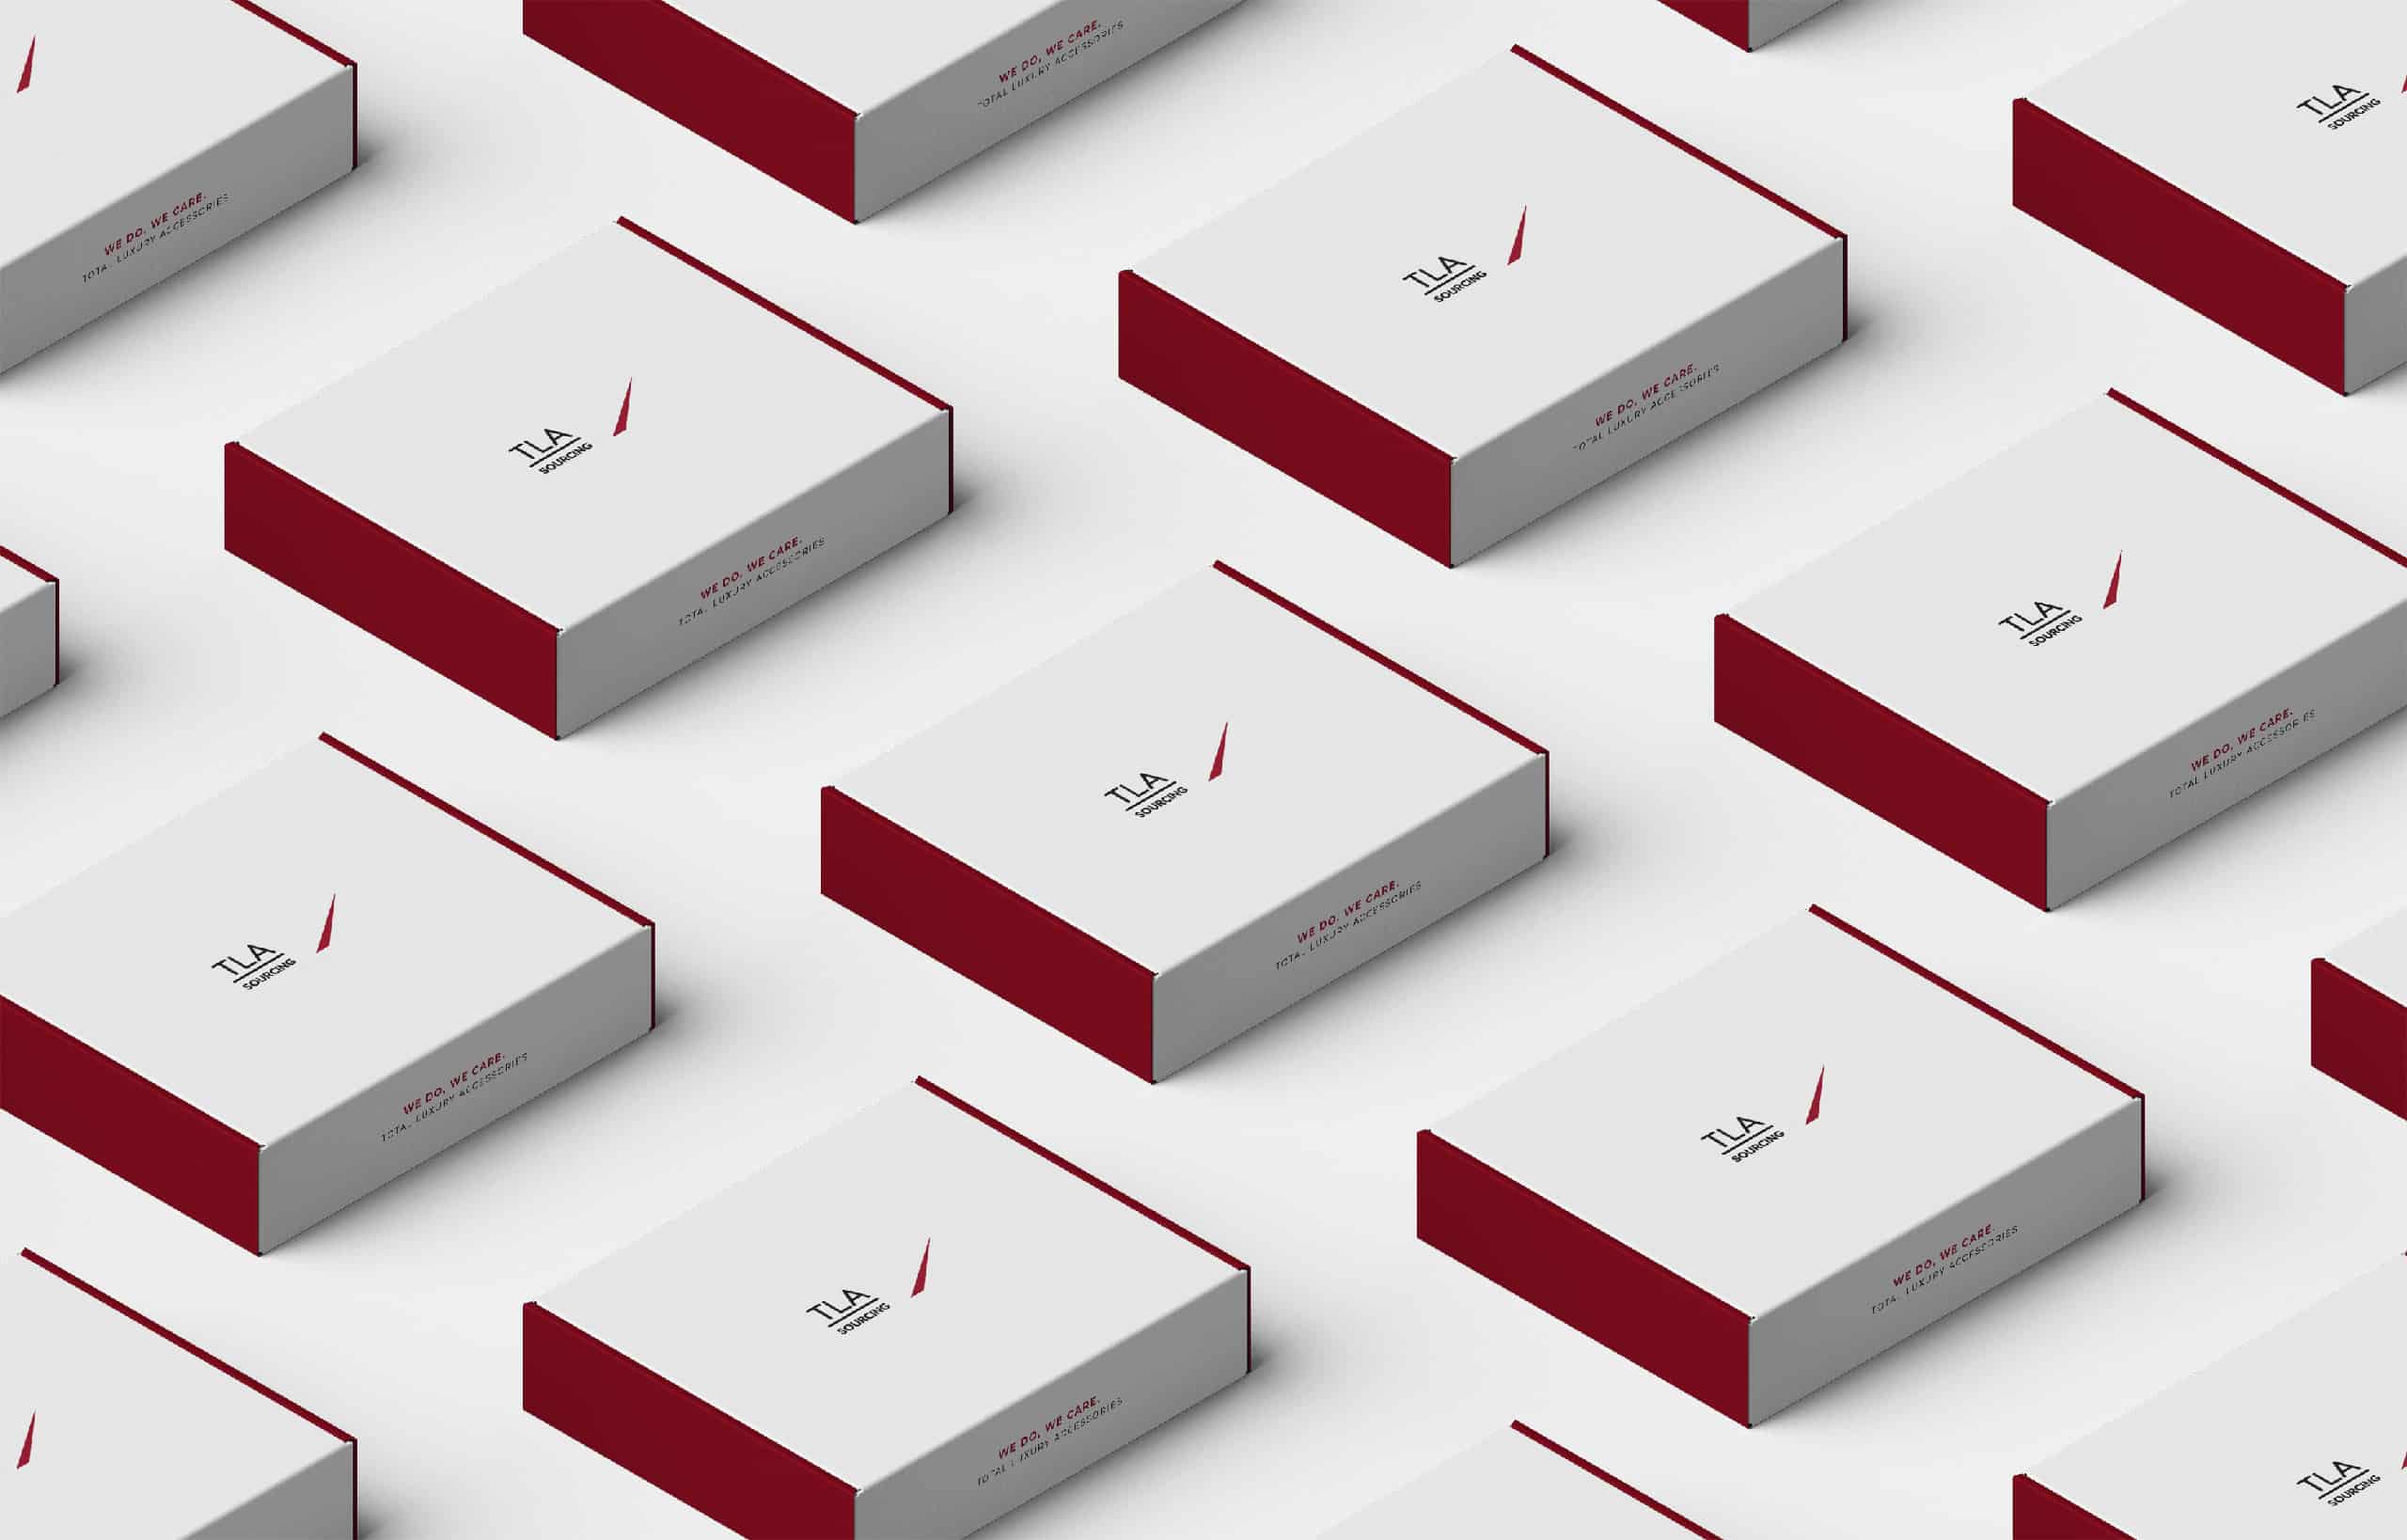 Box Grid Mockup by Anthony Boyd Graphics